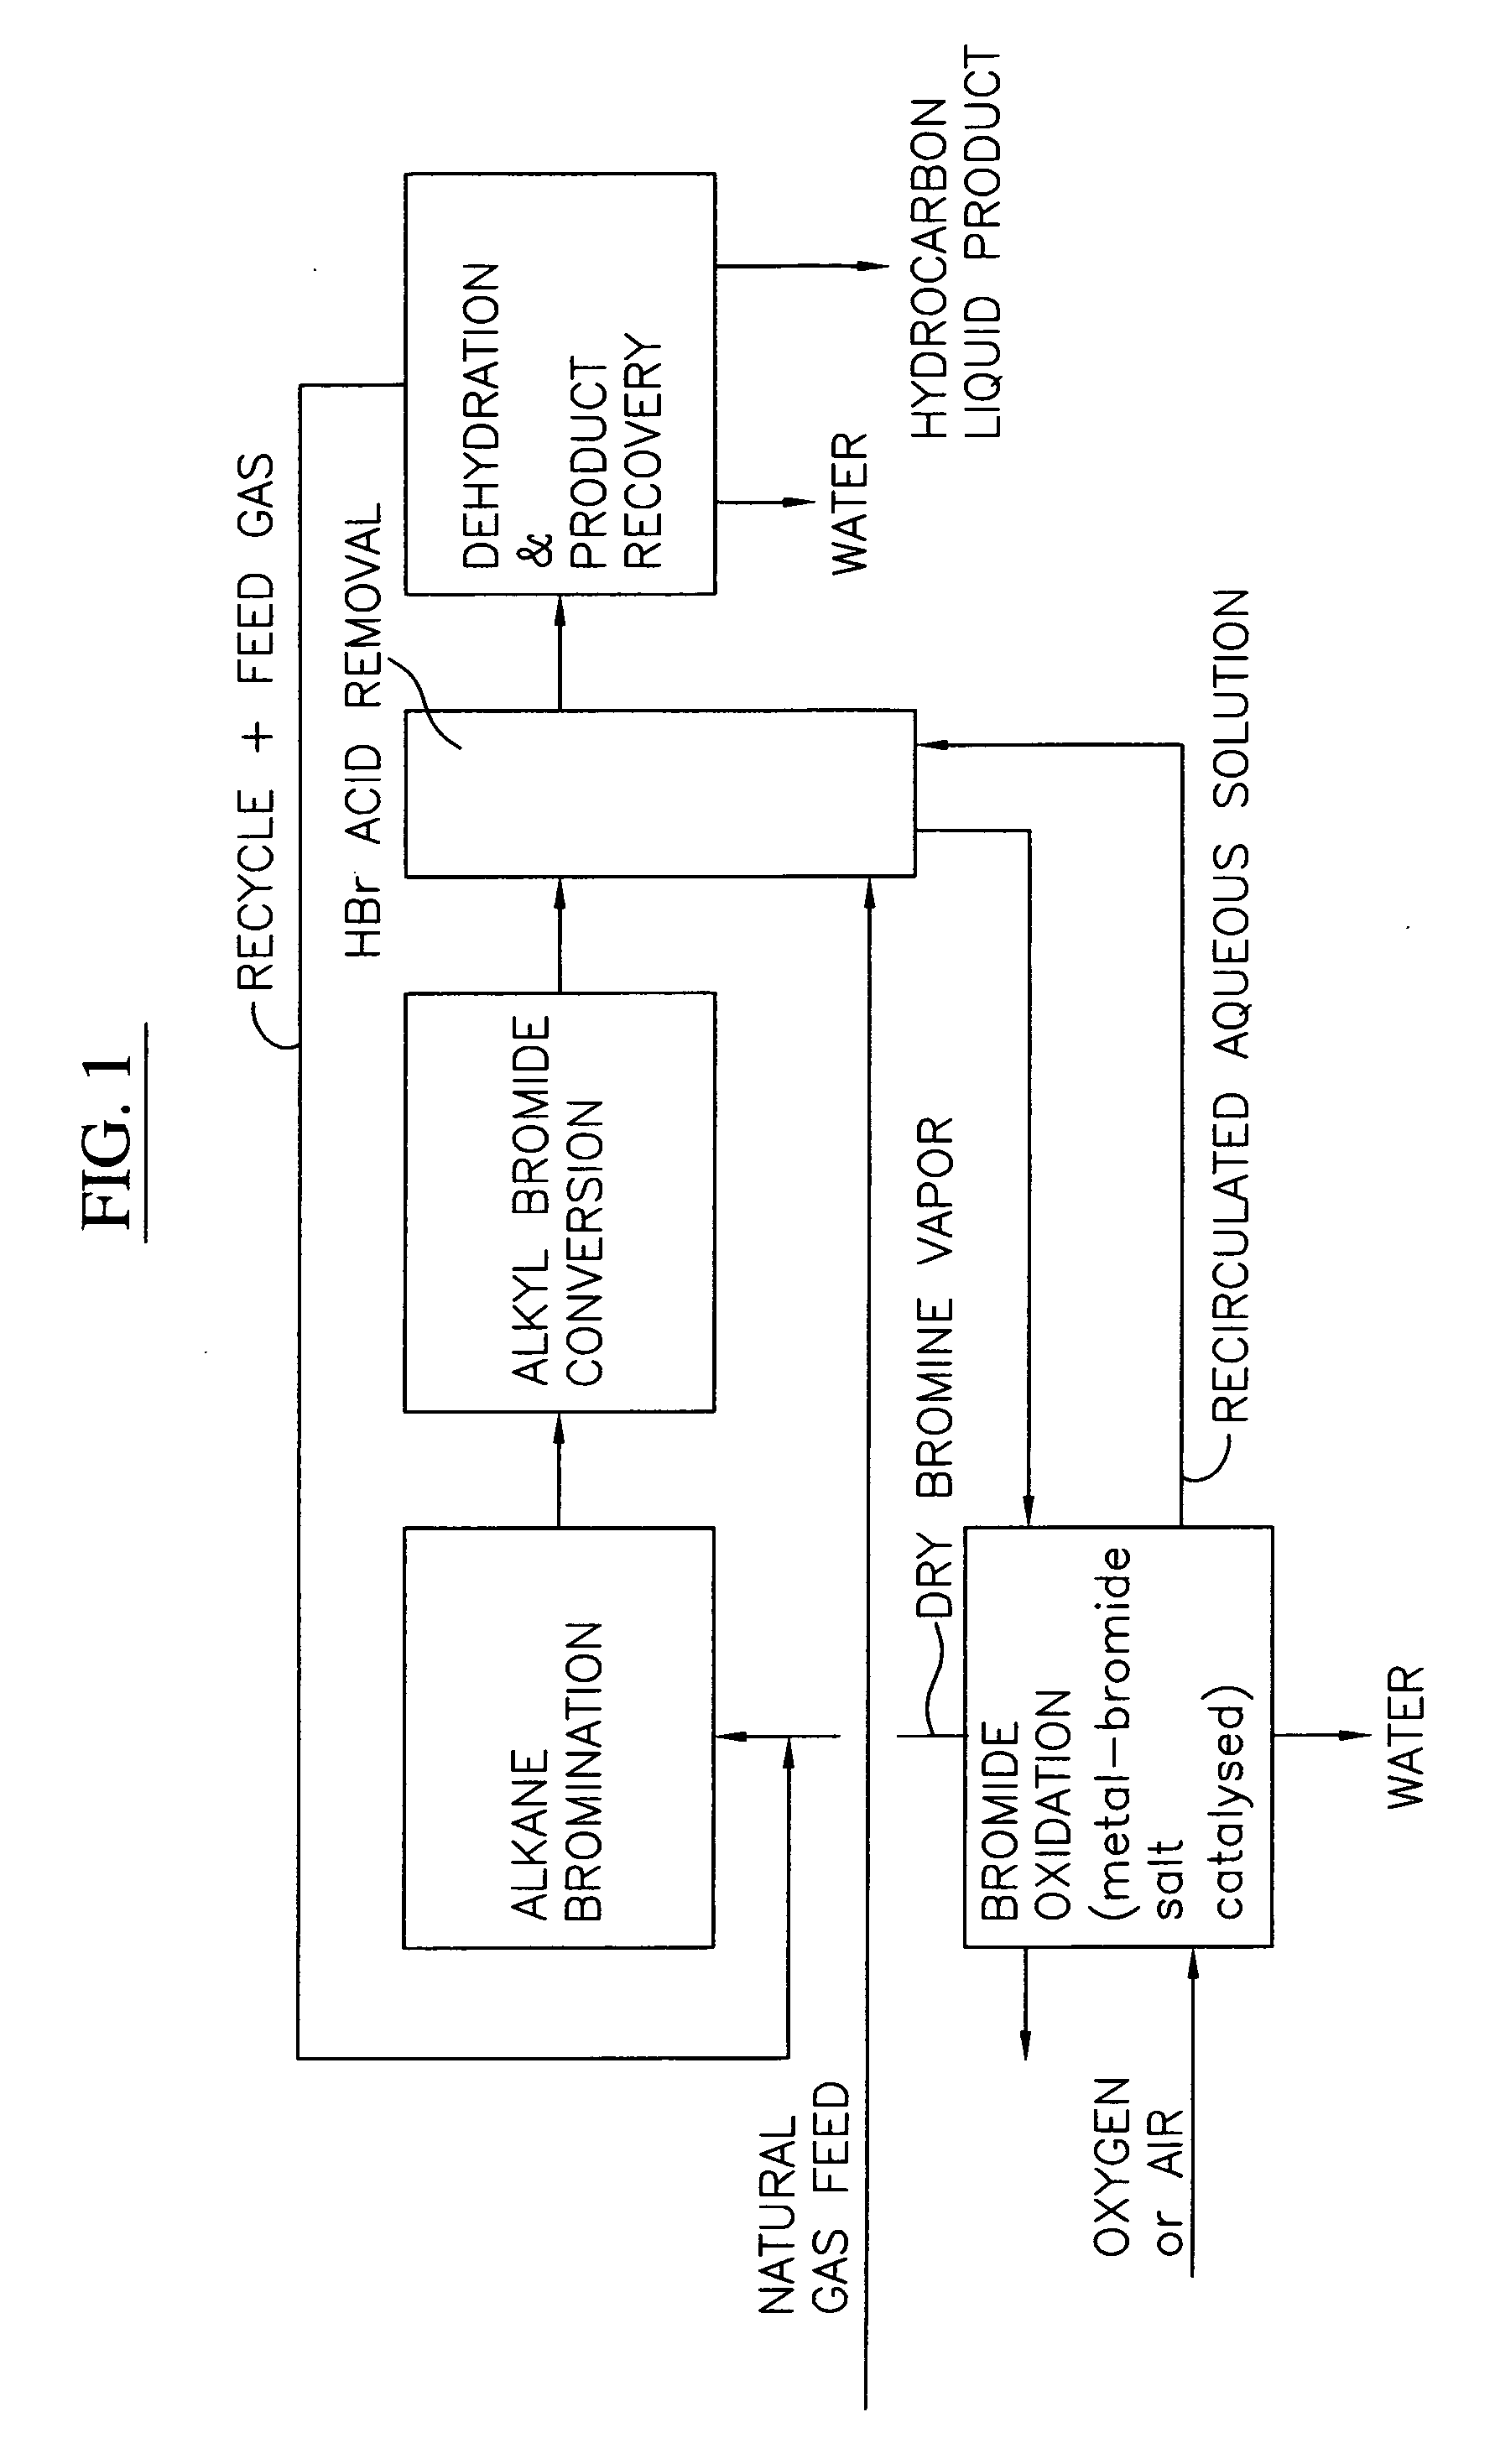 Process for converting gaseous alkanes to olefins and liquid hydrocarbons